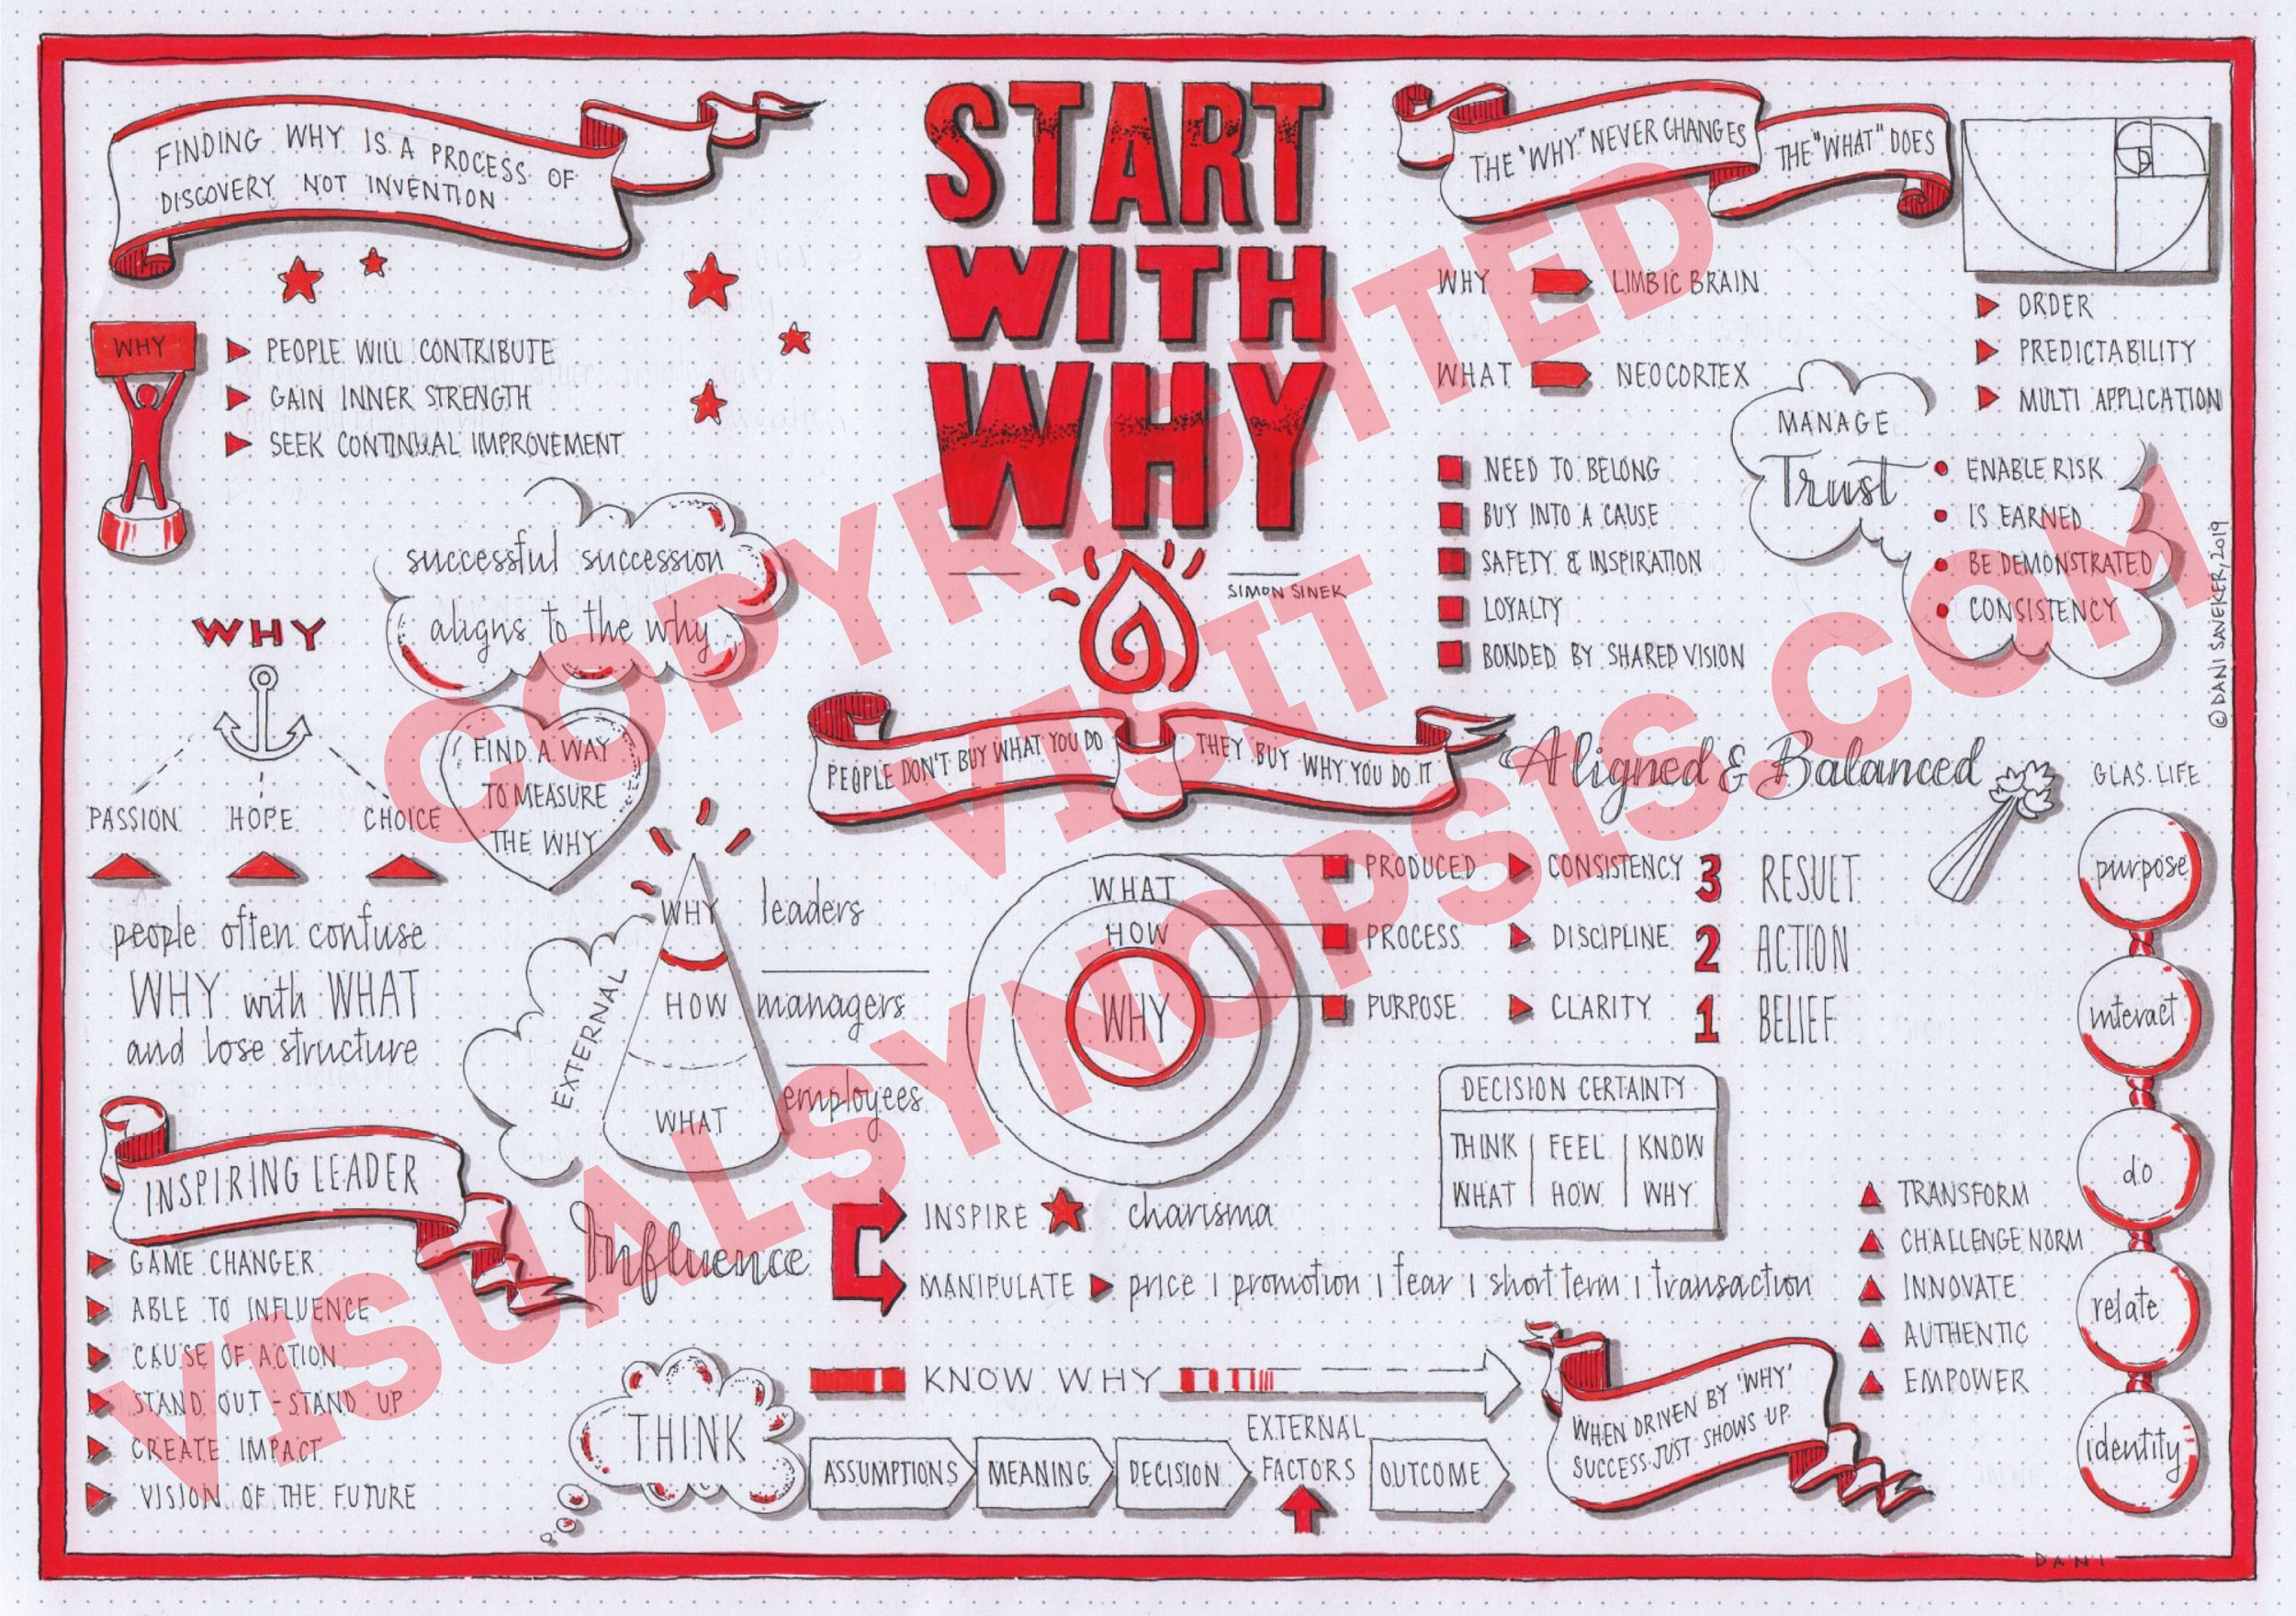 Start With Why (Simon Sinek) visual synopsis by Dani Saveker — Visual  Synopsis